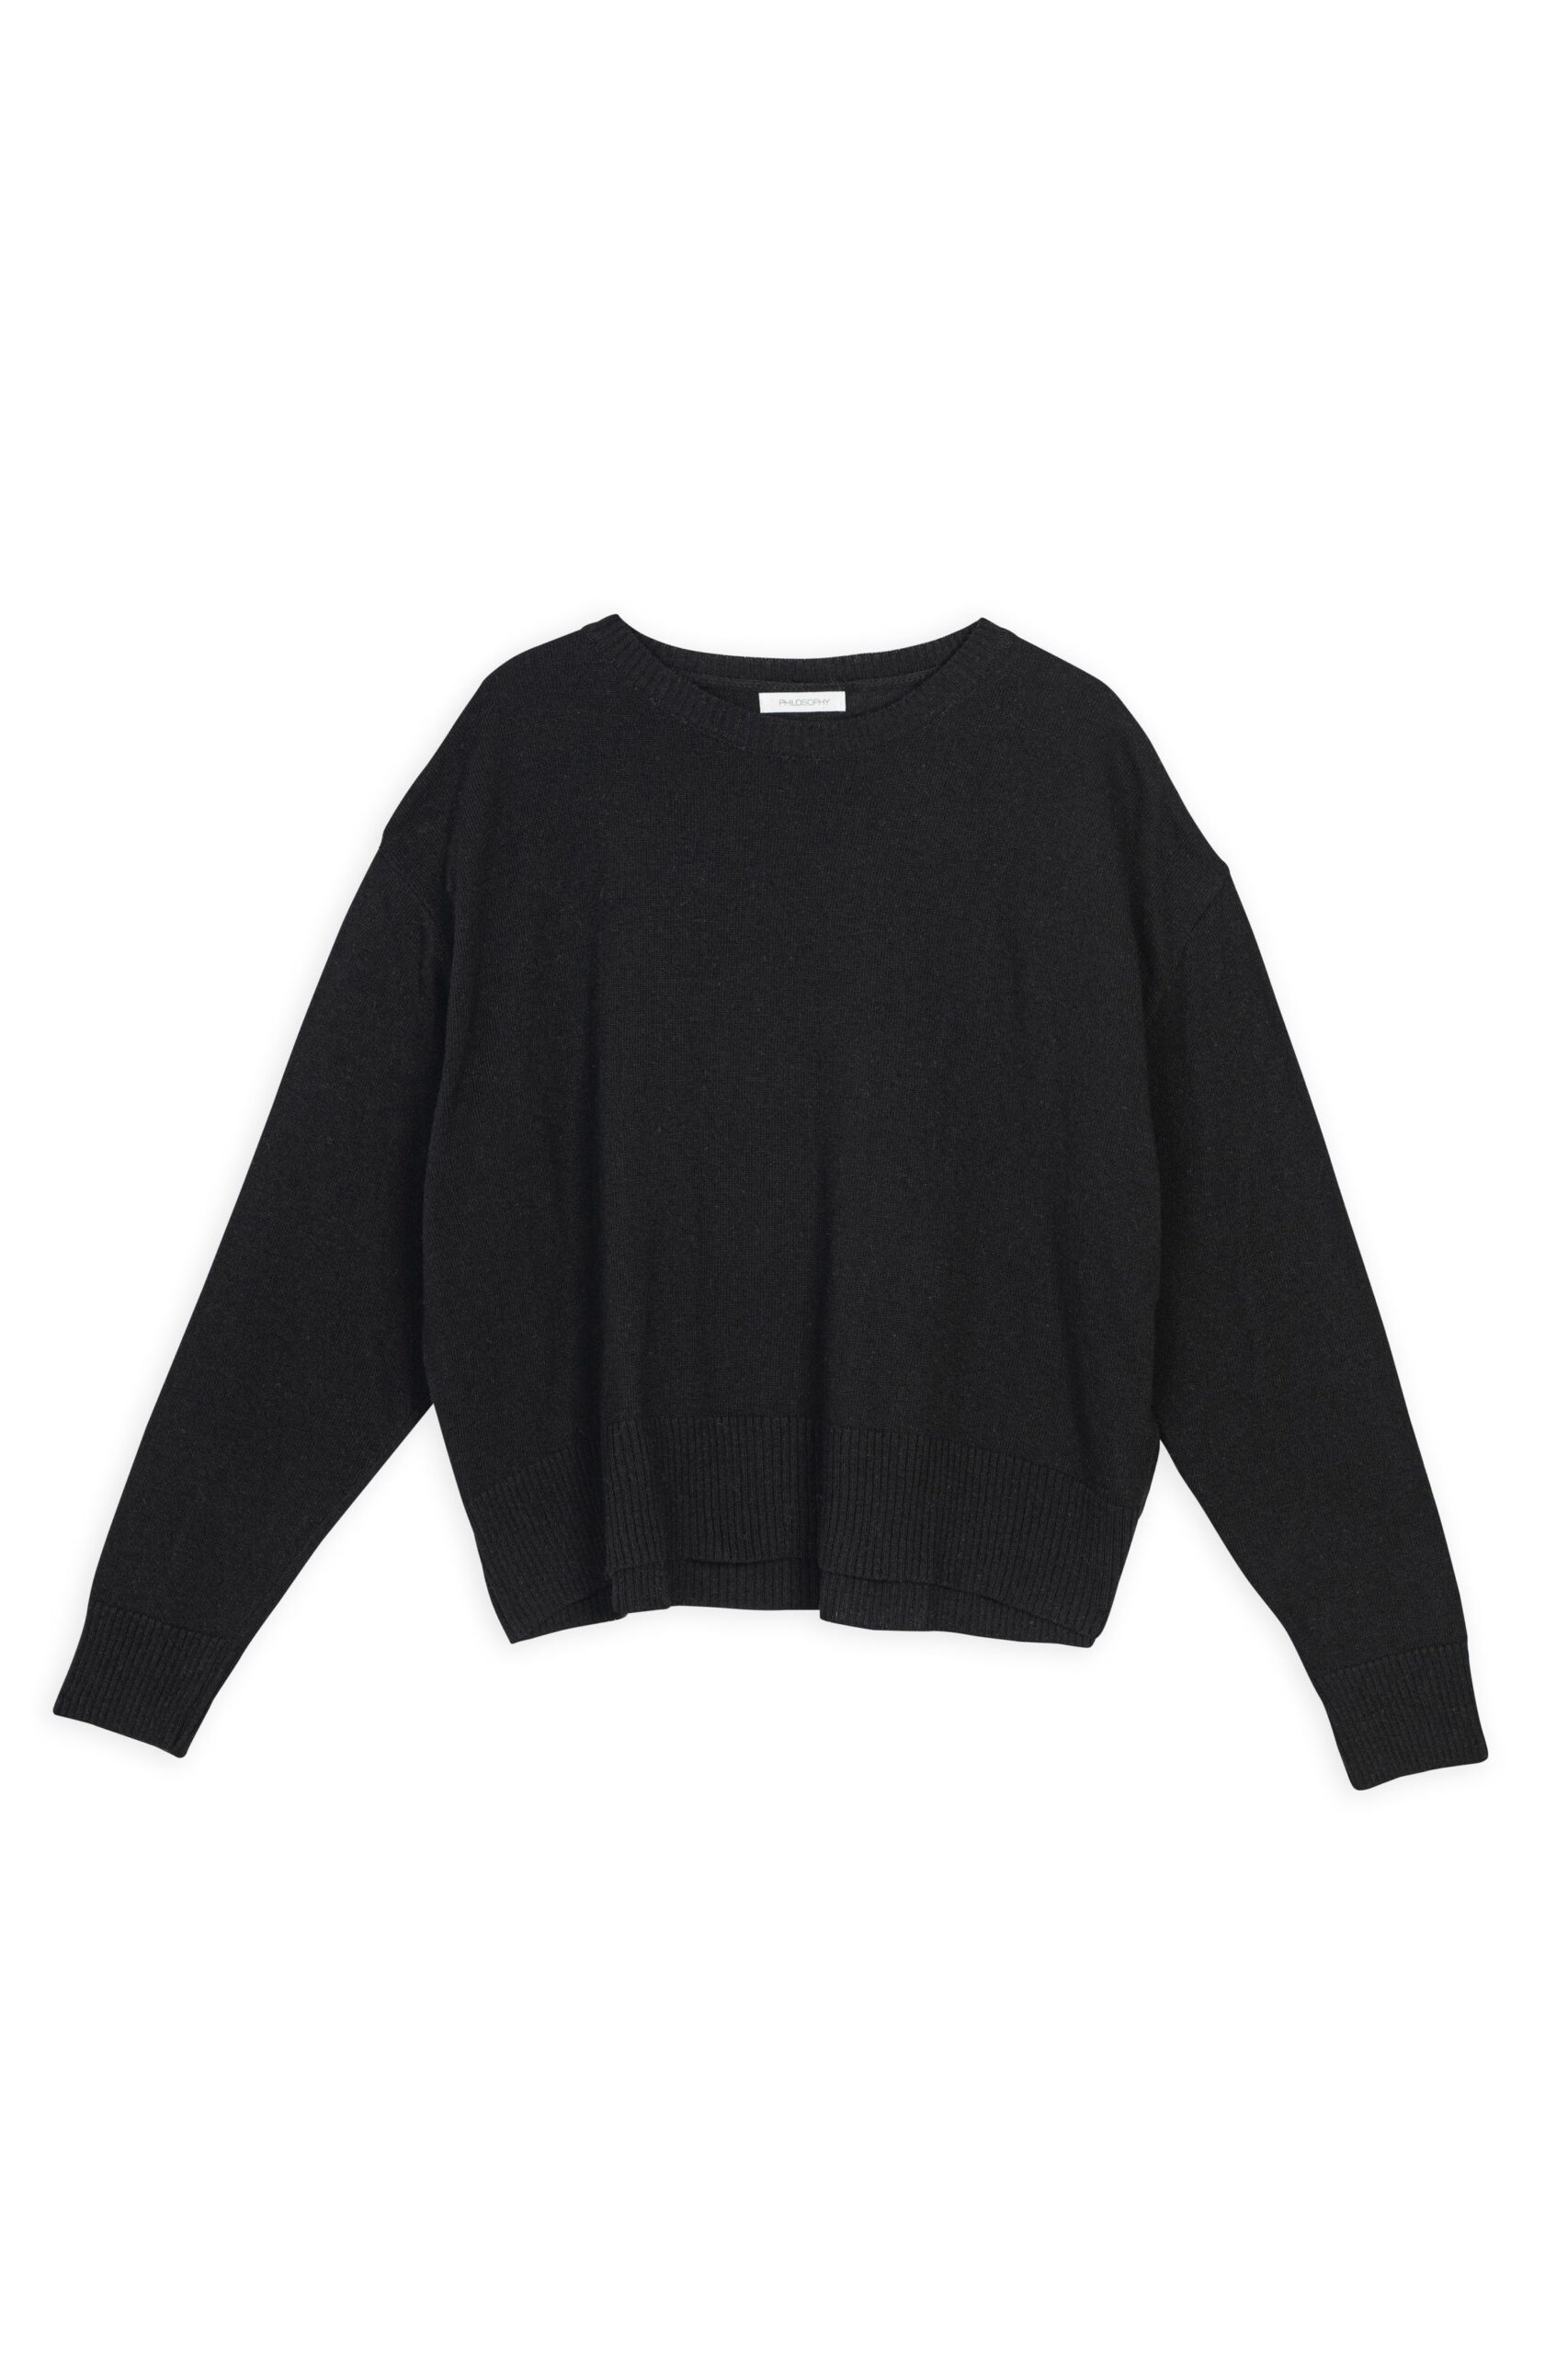 Philosophy cashmere cropped roundneck sweater